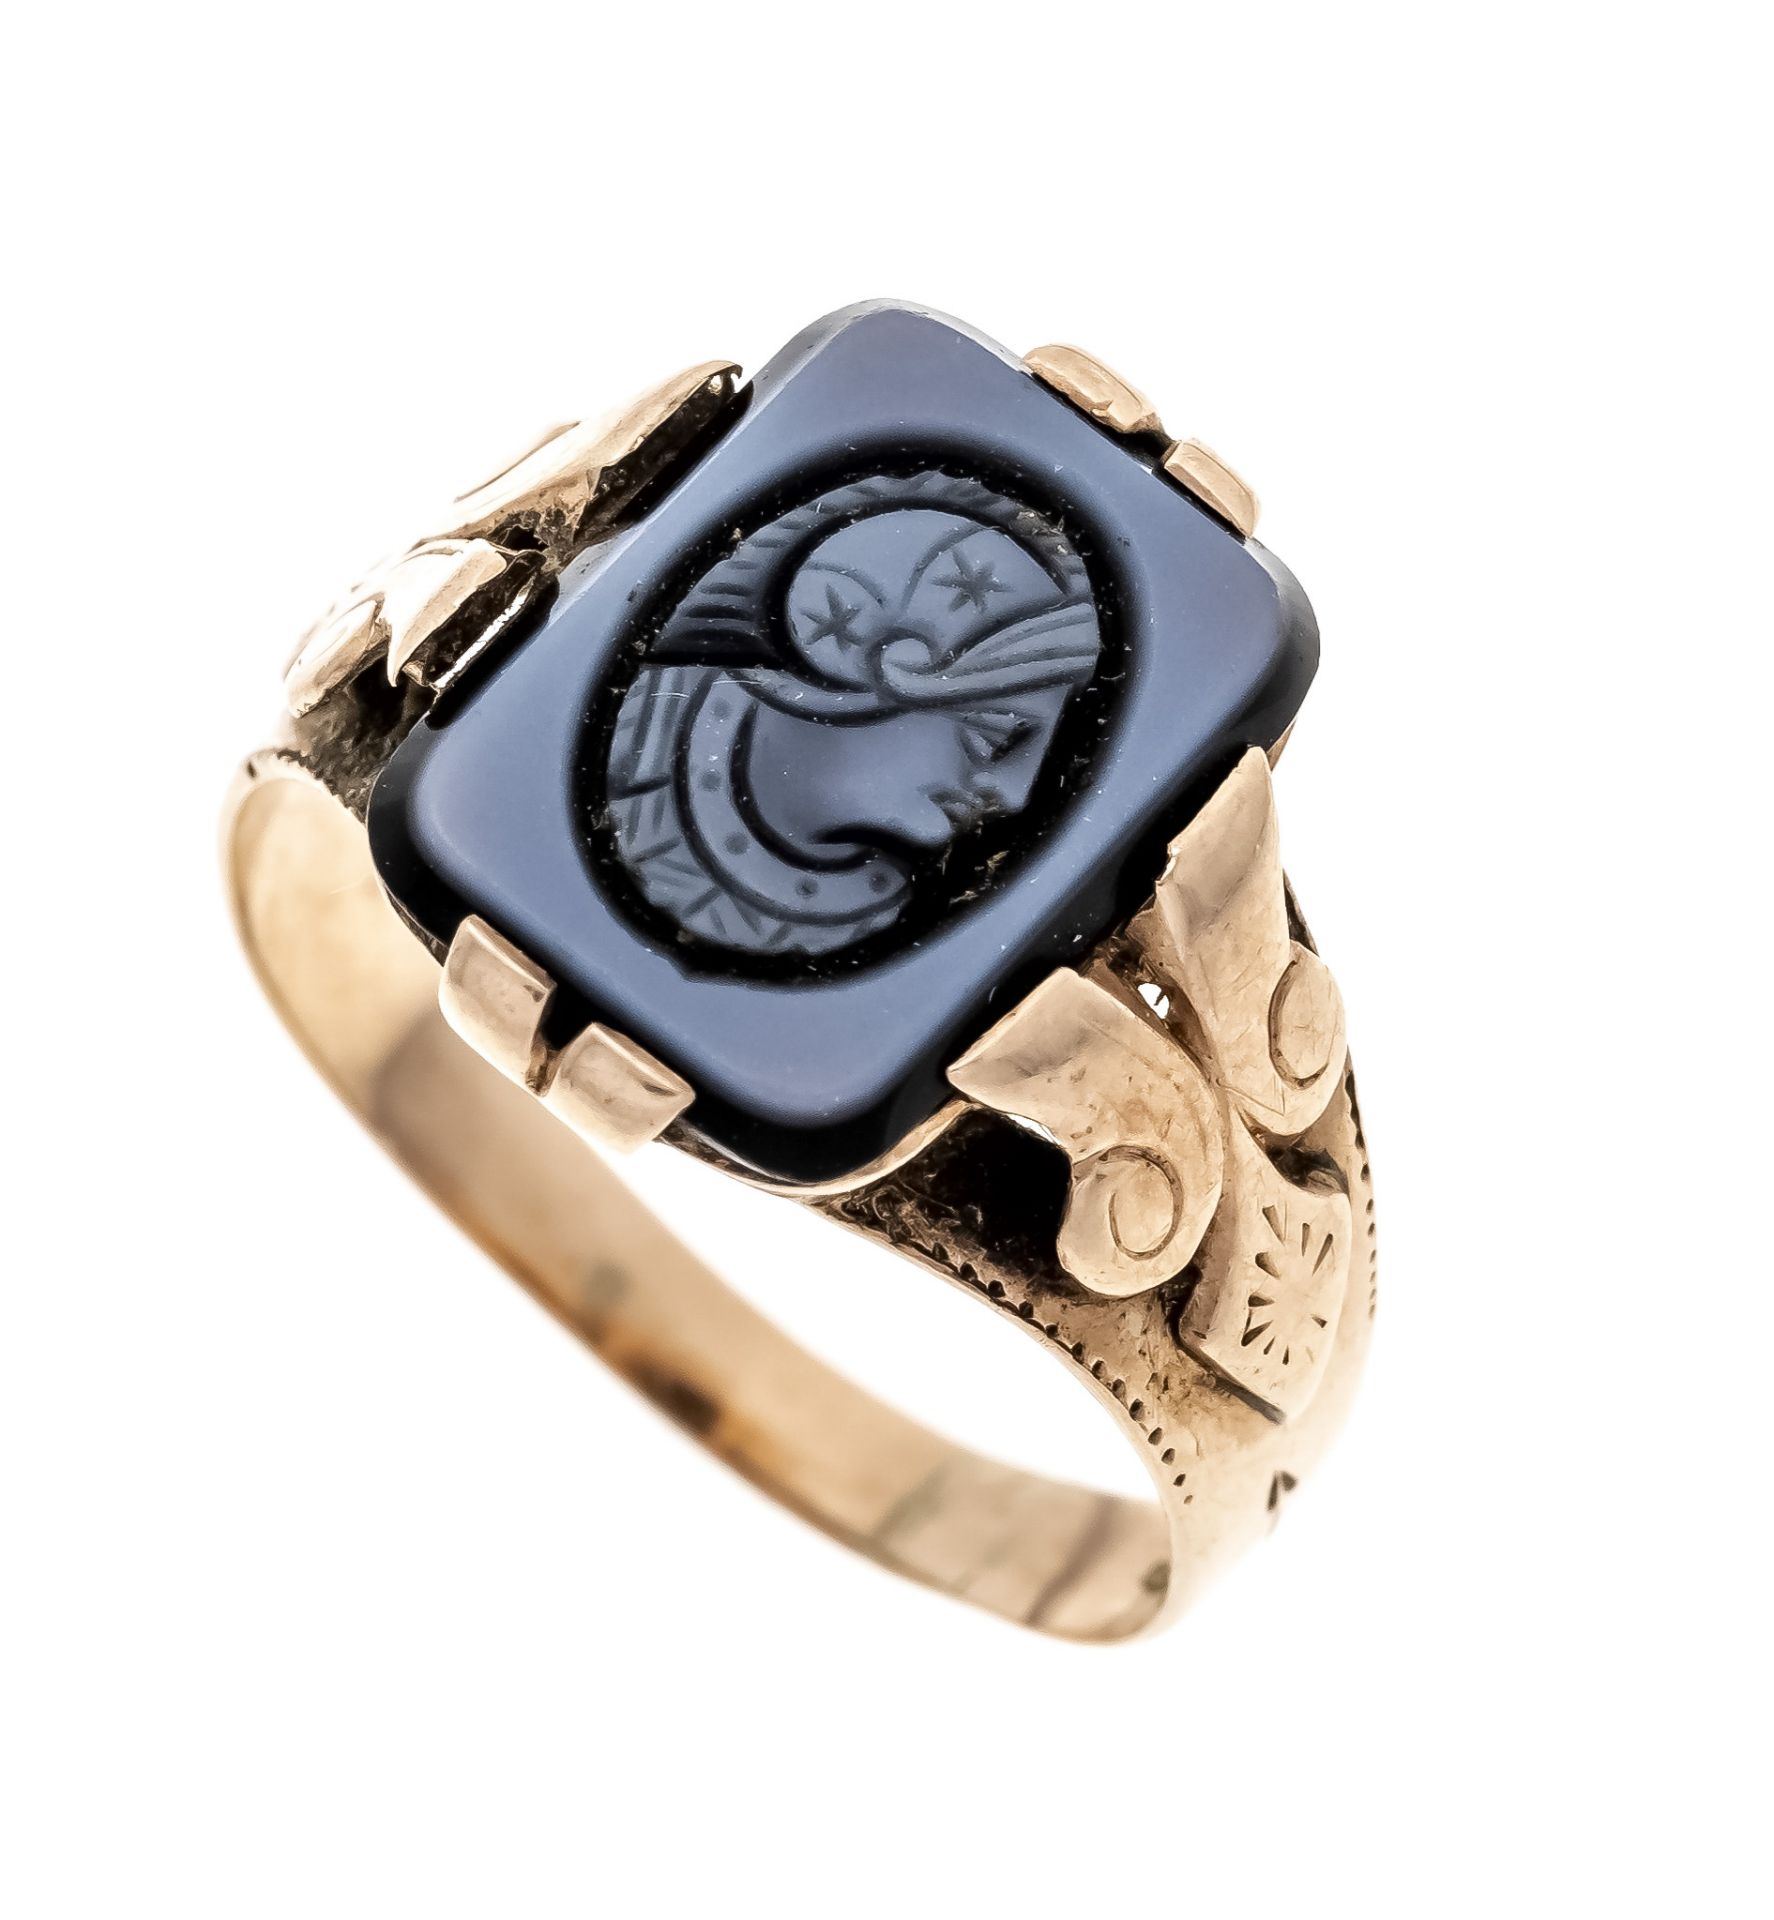 A gemstone ring RG 585/000 with a layer stone cut in the shape of an antique portrait, 11.1 x 8.0